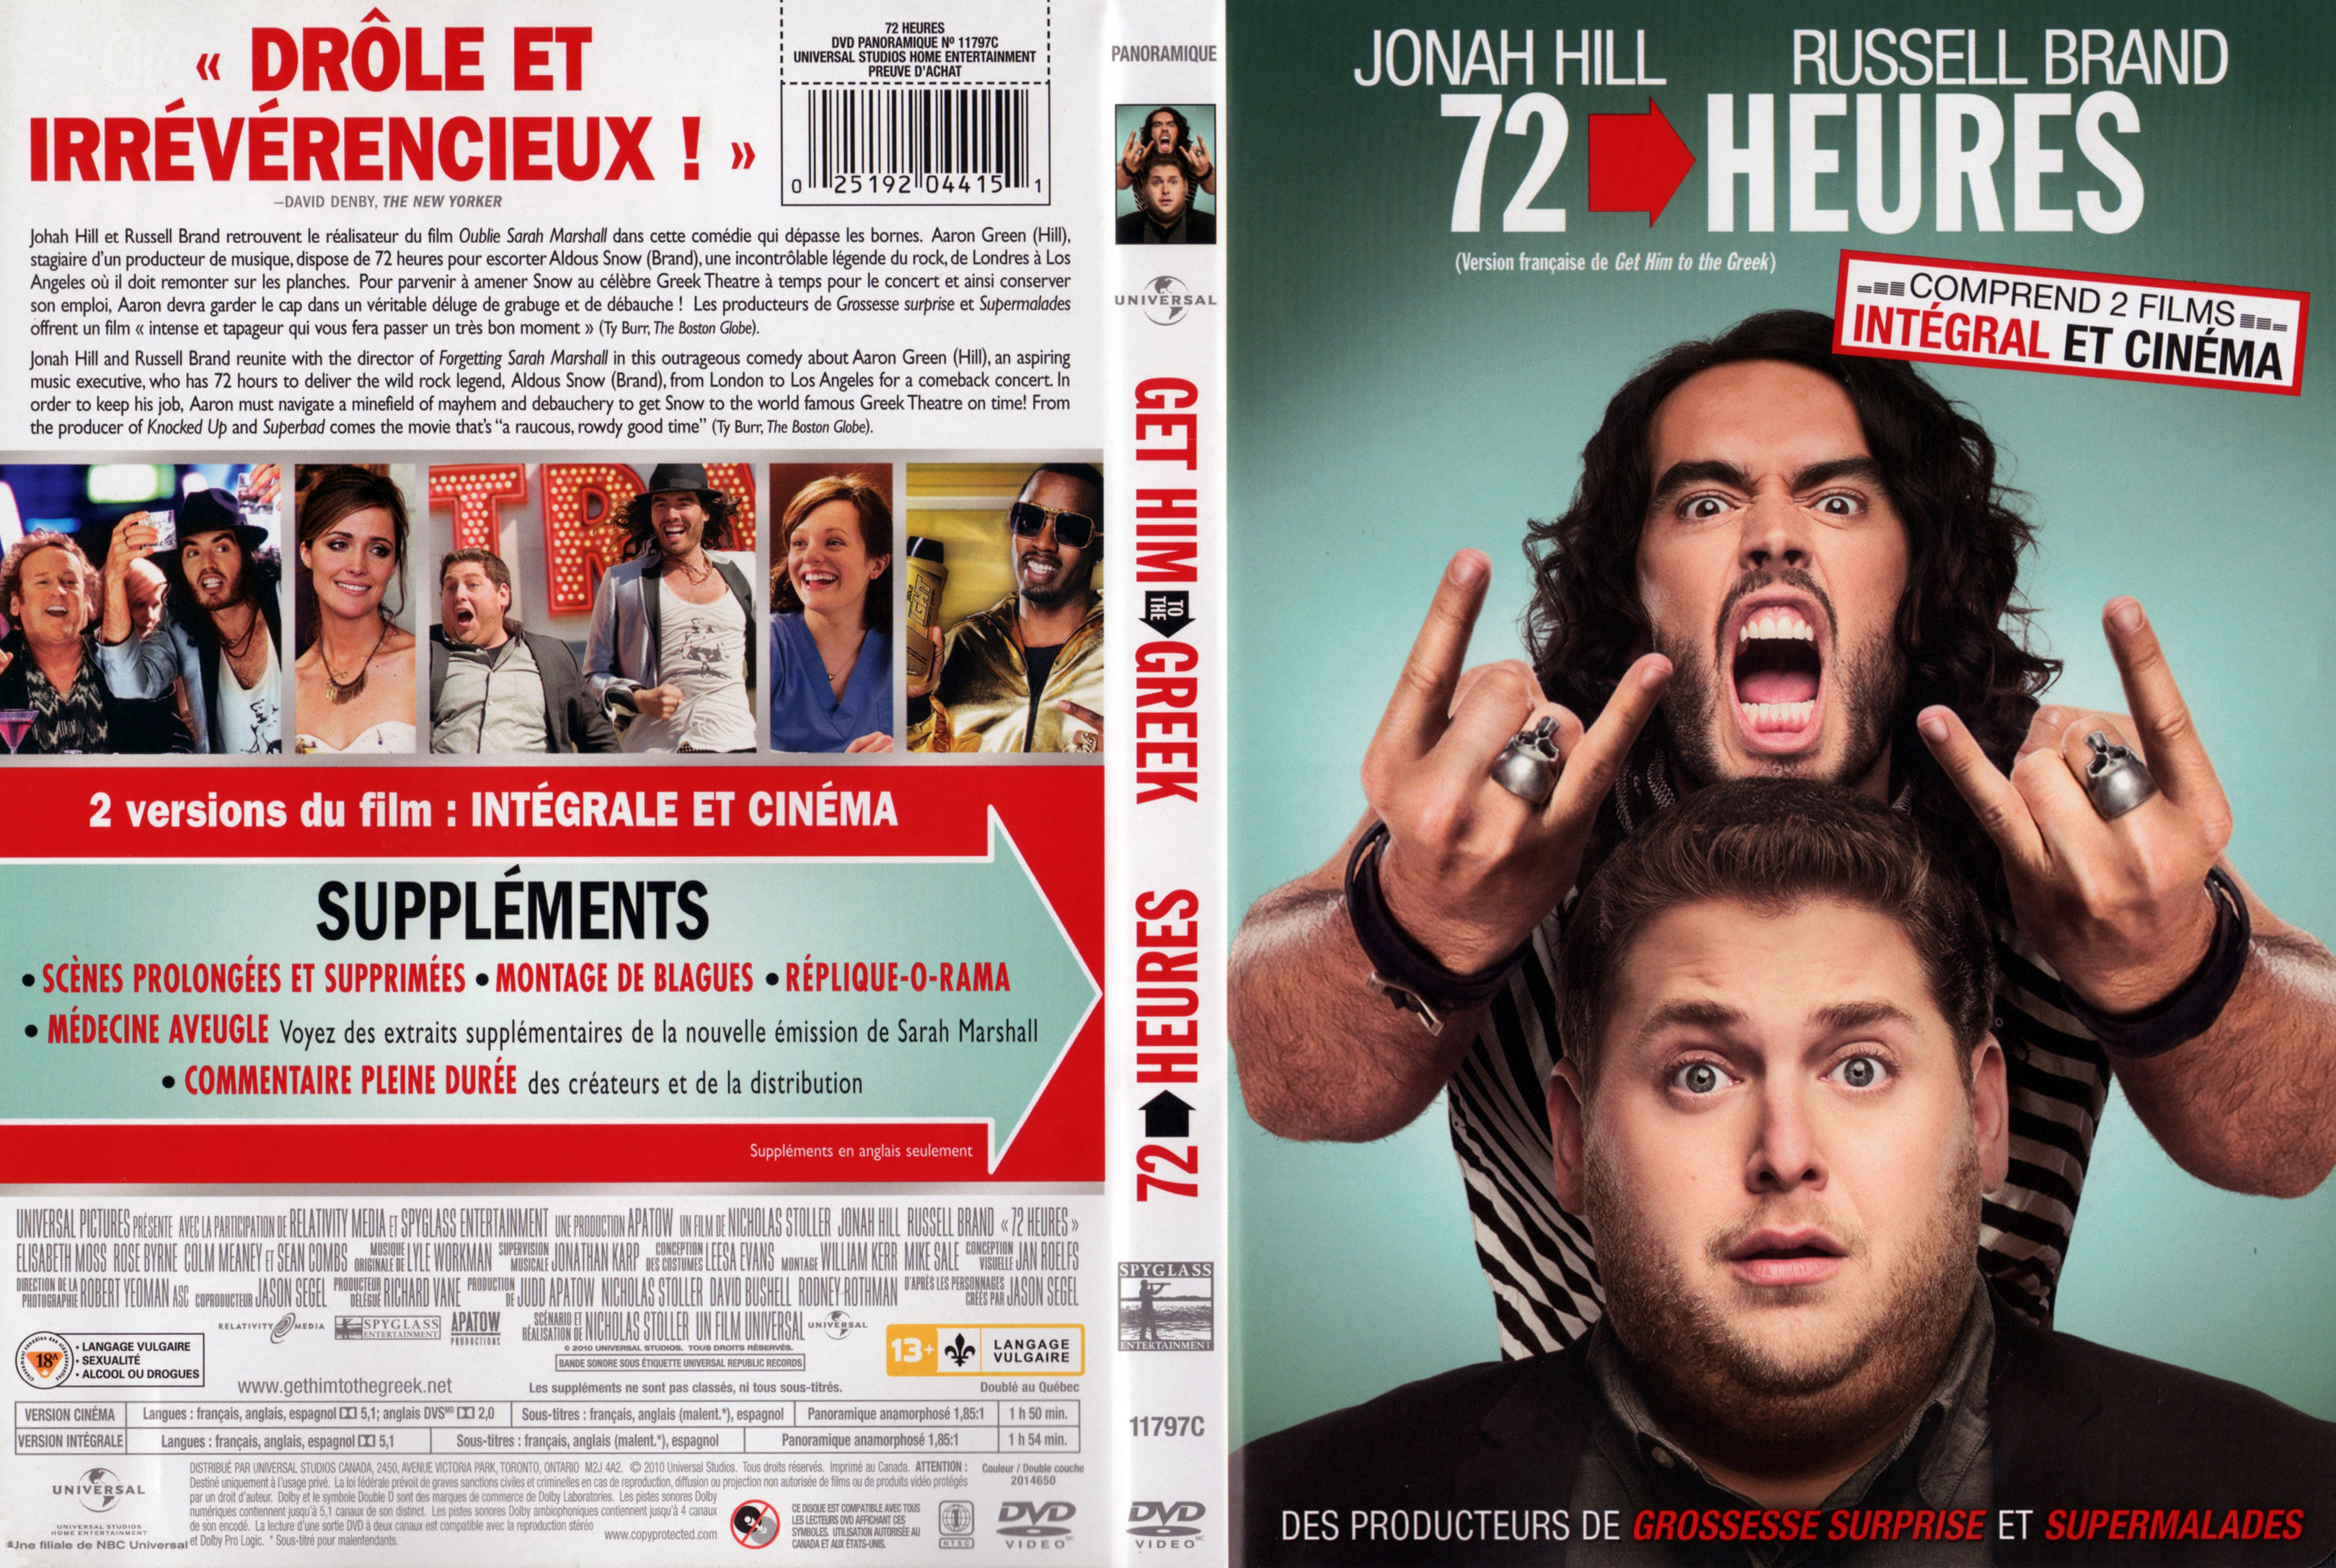 Jaquette DVD 72 heures - Get him to the greek (Canadienne)